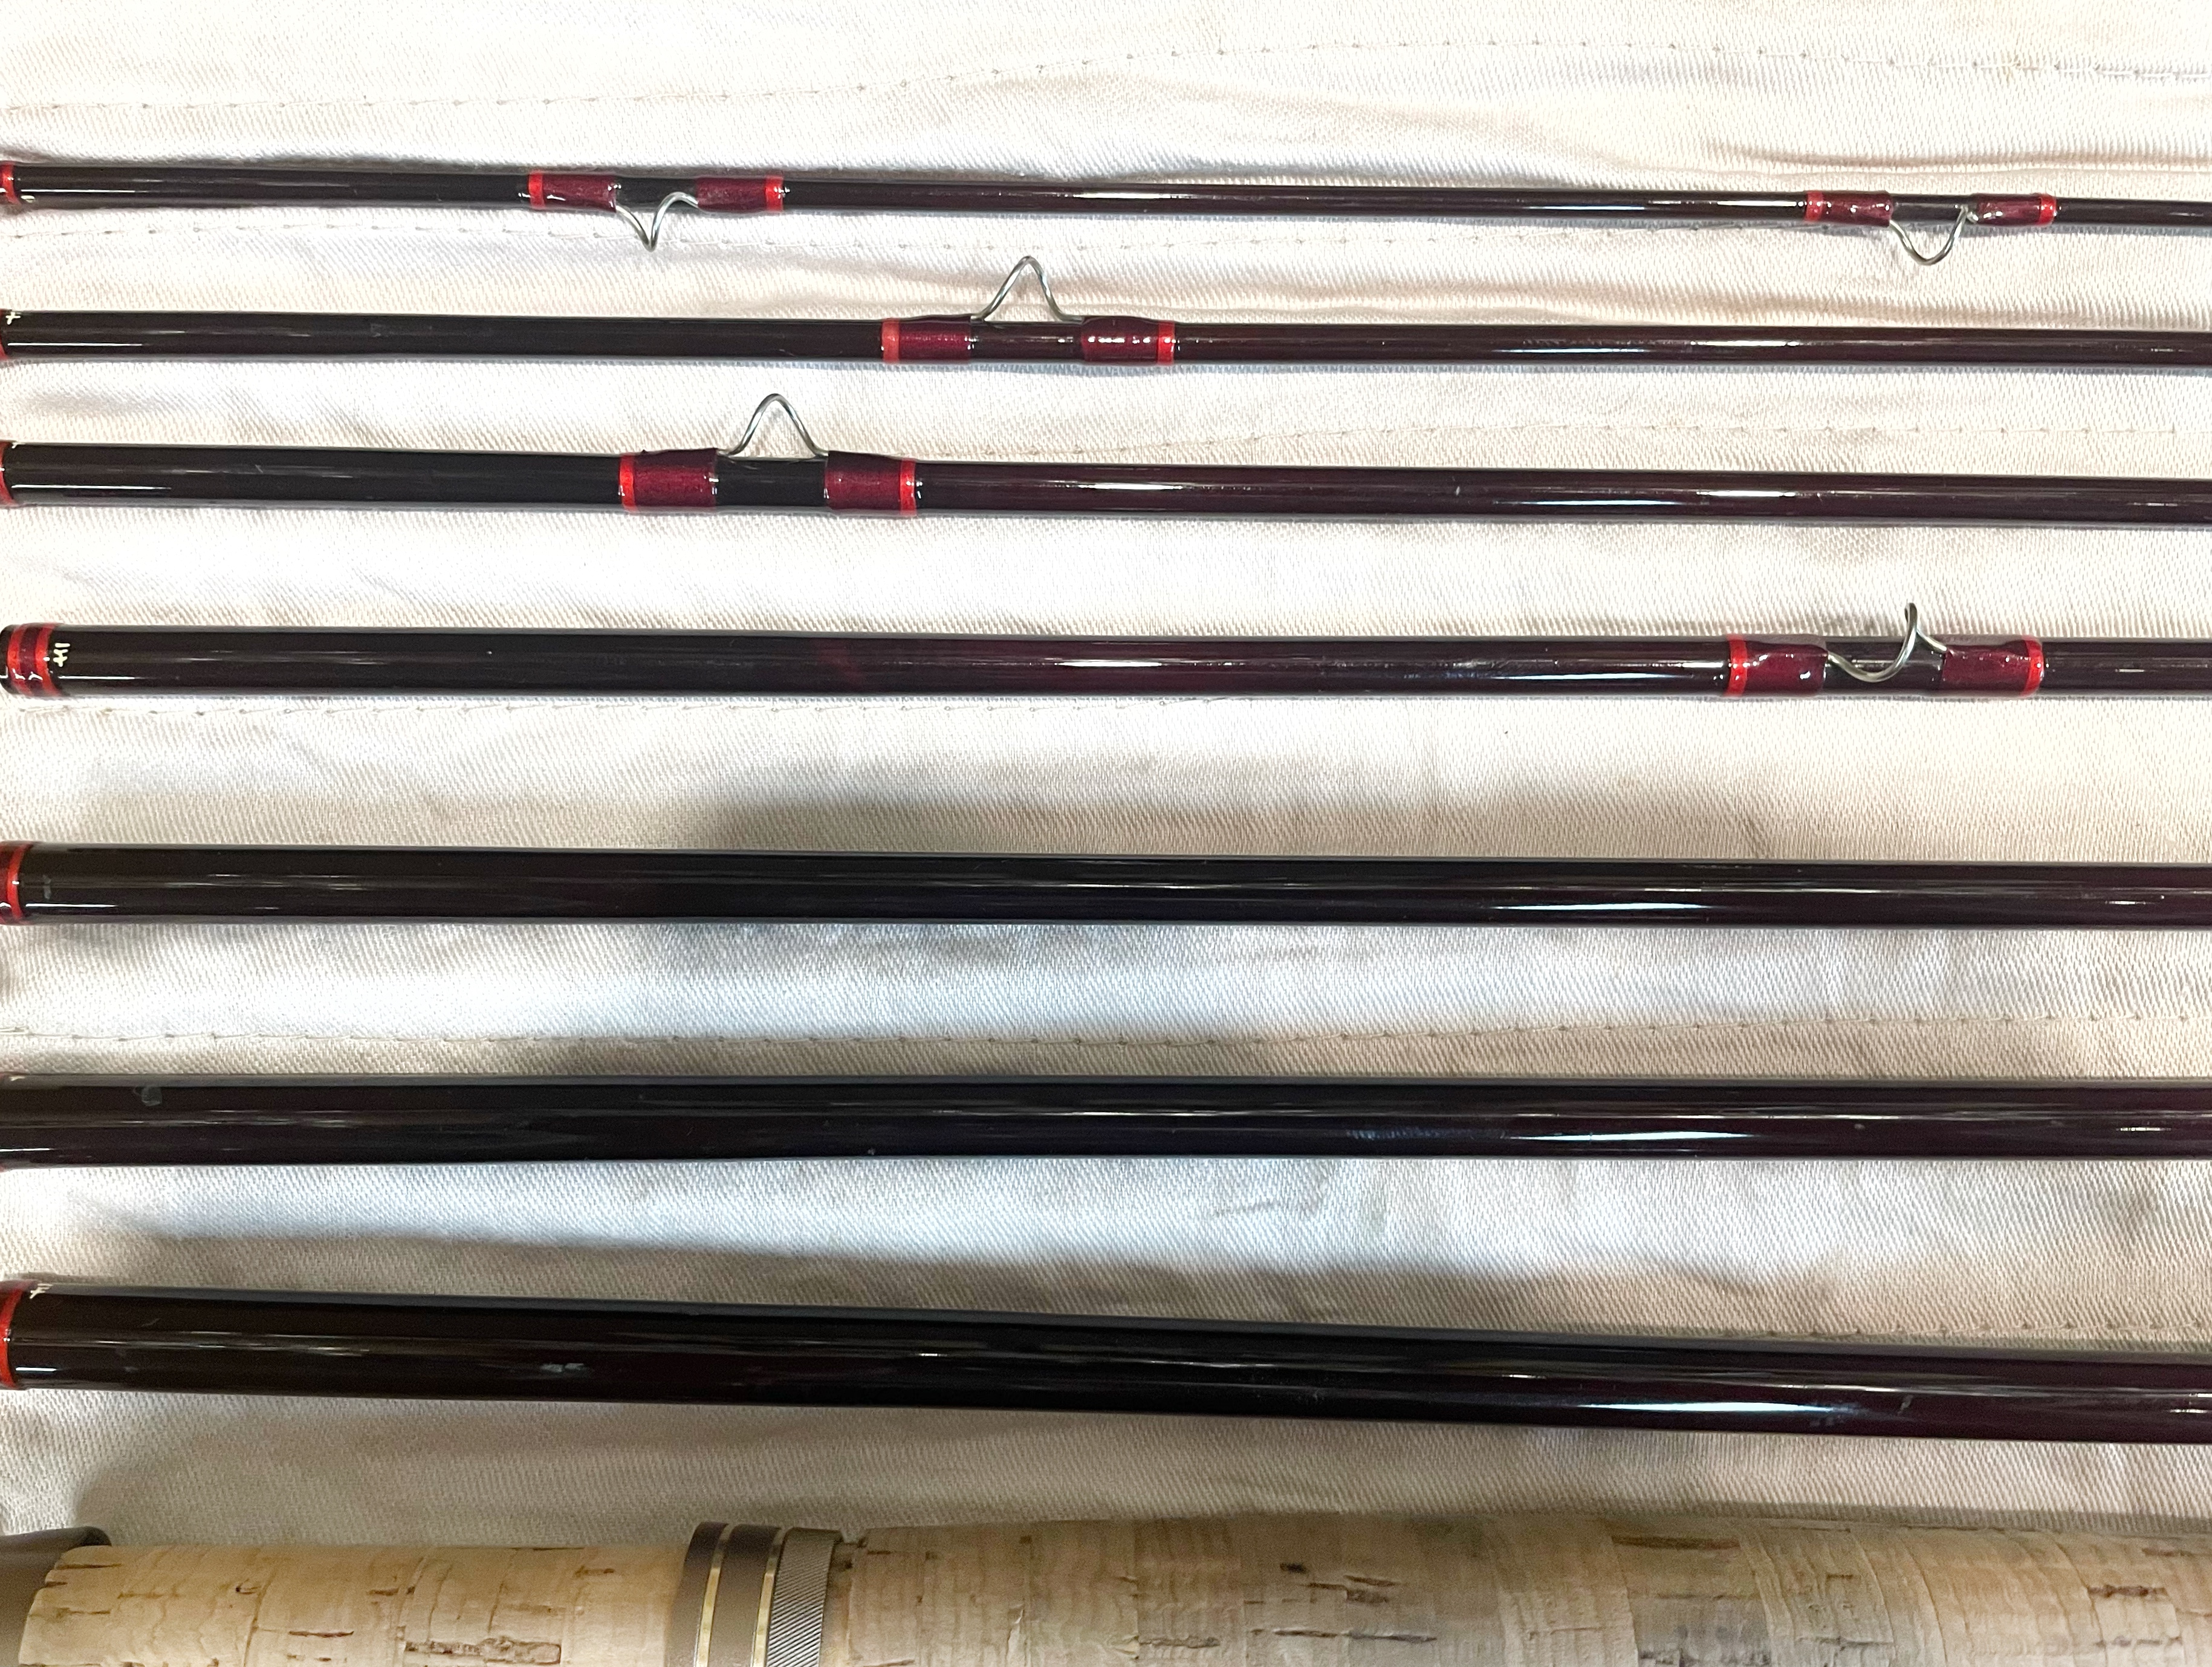 Used Hardy Smuggler 9'5 - 7wt 8 piece Fly Rod - Western Rivers